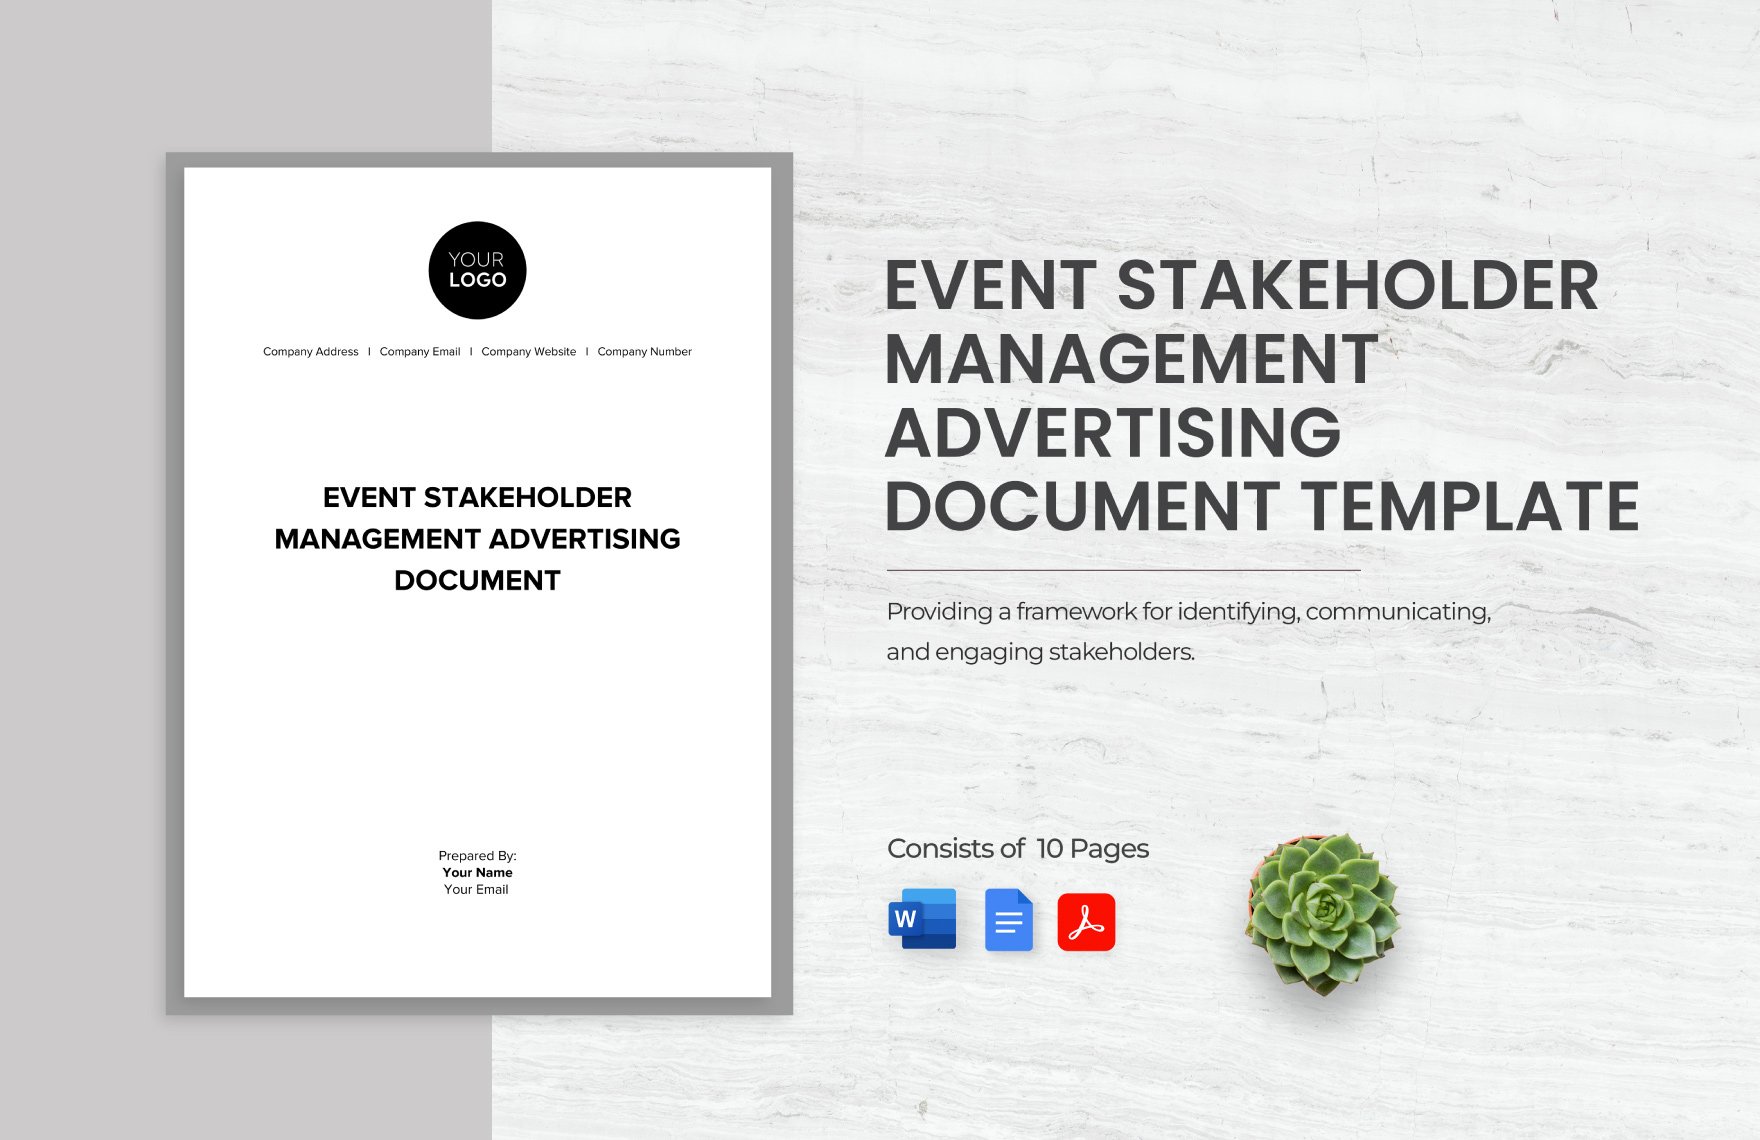 Free Event Stakeholder Management Advertising Document Template in Word, Google Docs, PDF